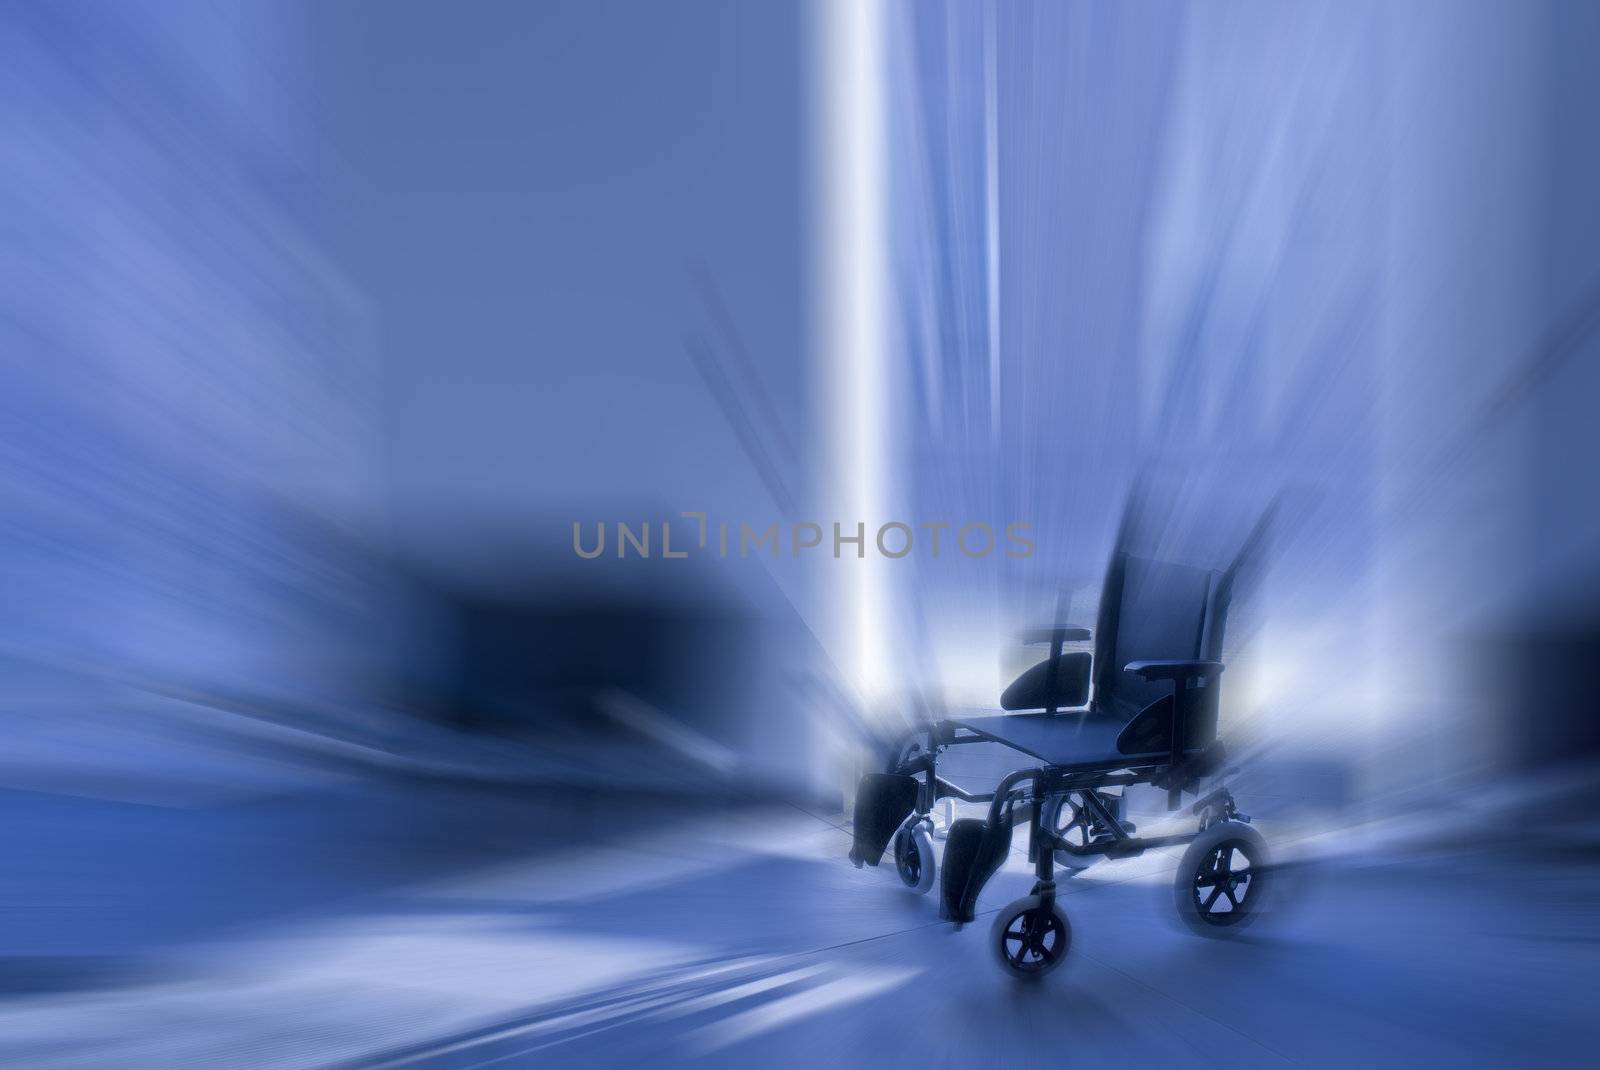 Free wheelchair on hospital. Zoom blur. Has a miracle happened?